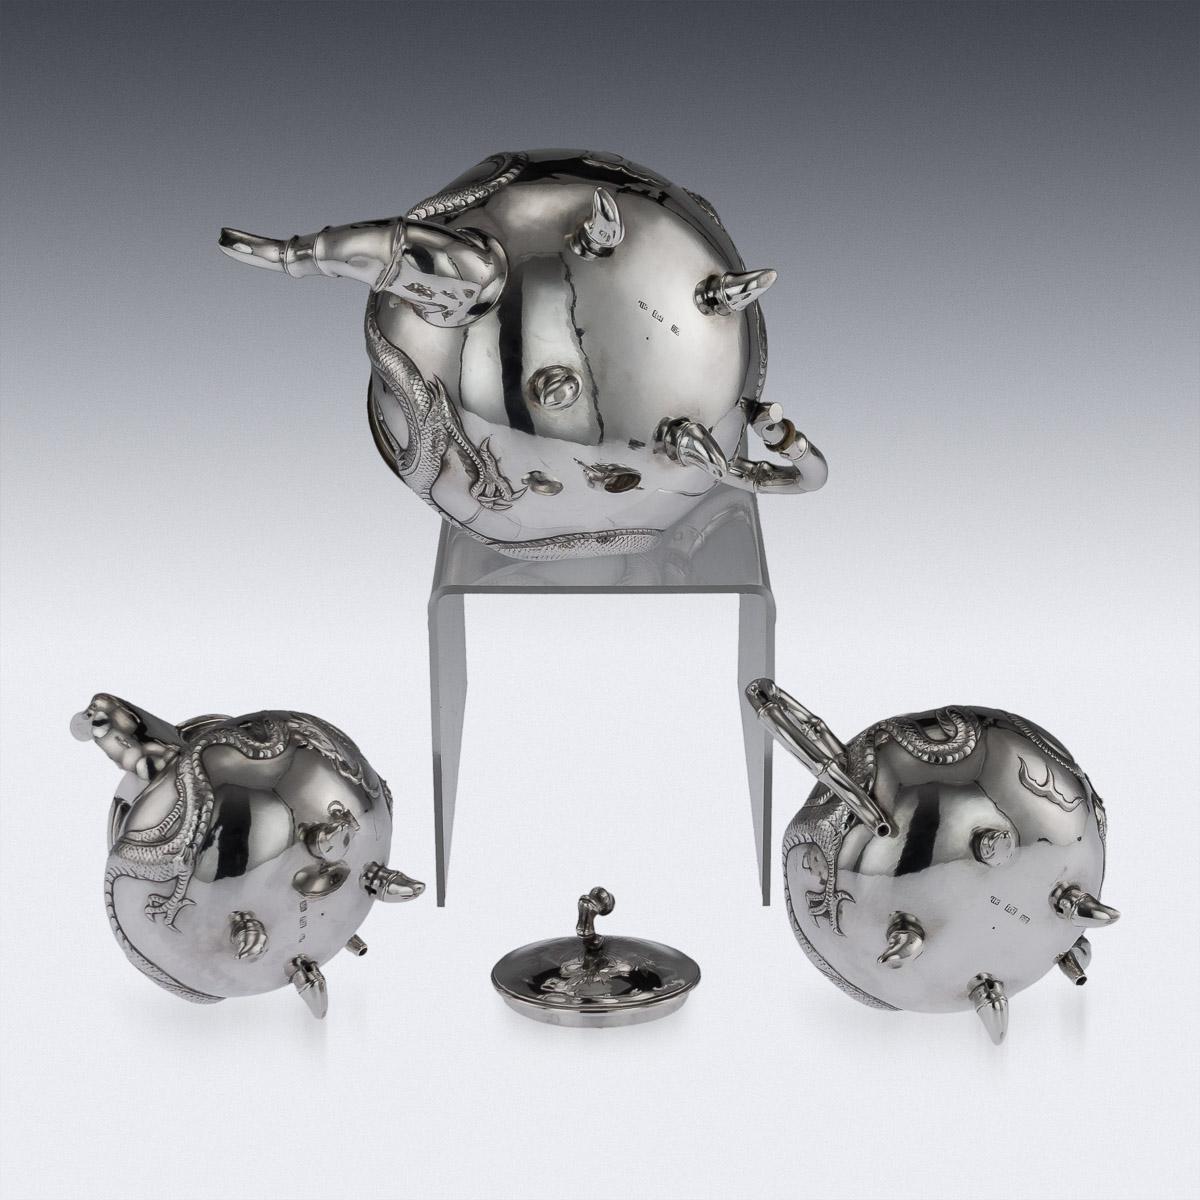 20th Century Antique Chinese Export Solid Silver Dragon Tea Set, Kwan Wo, circa 1900